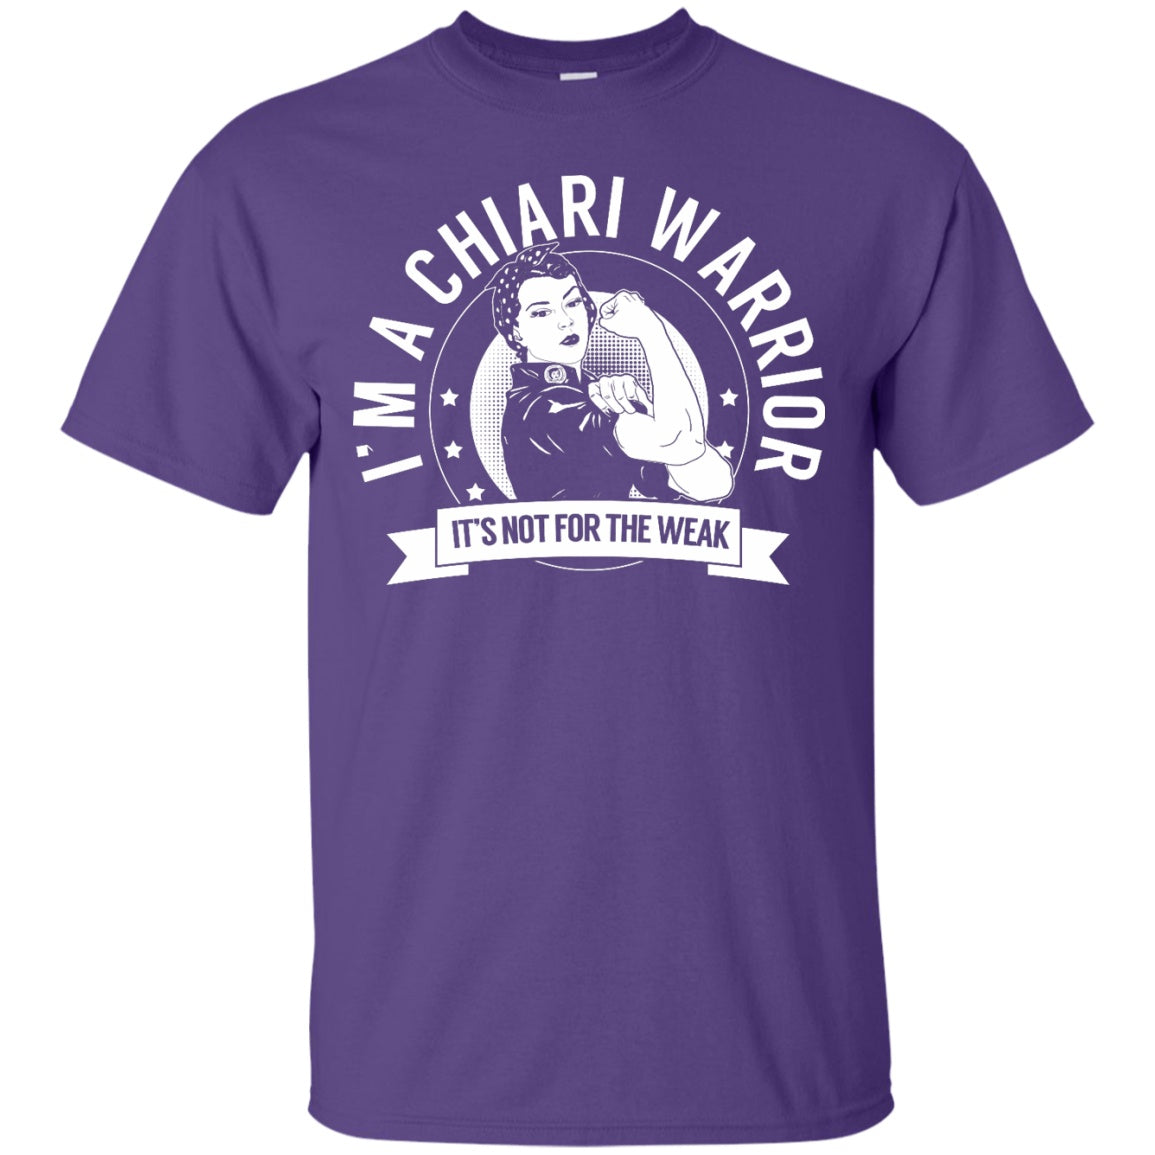 Chiari Warrior Not for the Weak Unisex Shirt - The Unchargeables